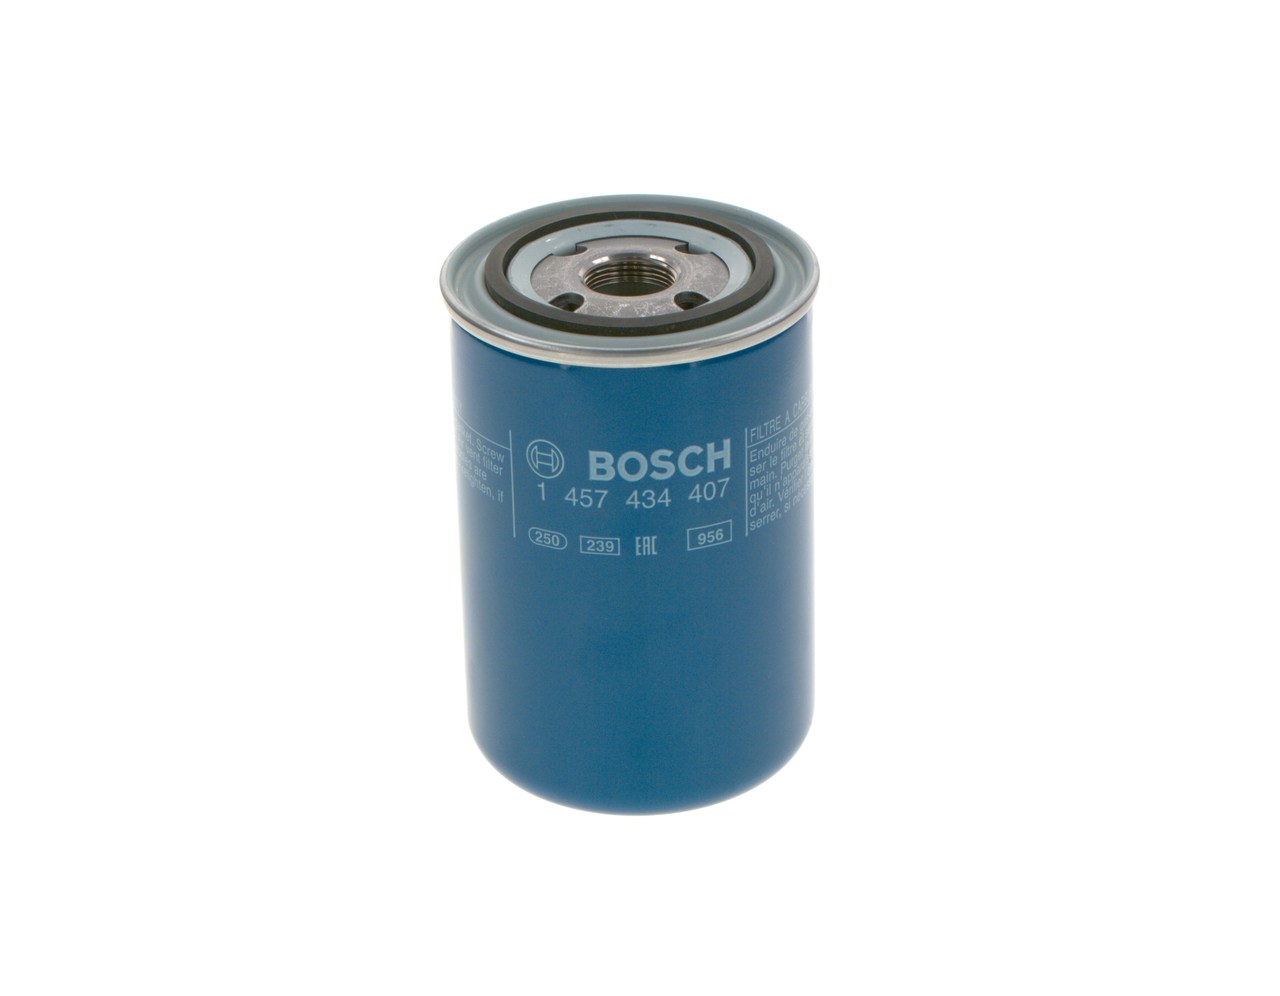 N 4407 BOSCH Spin-on Filter Height: 146,3mm Inline fuel filter 1 457 434 407 buy